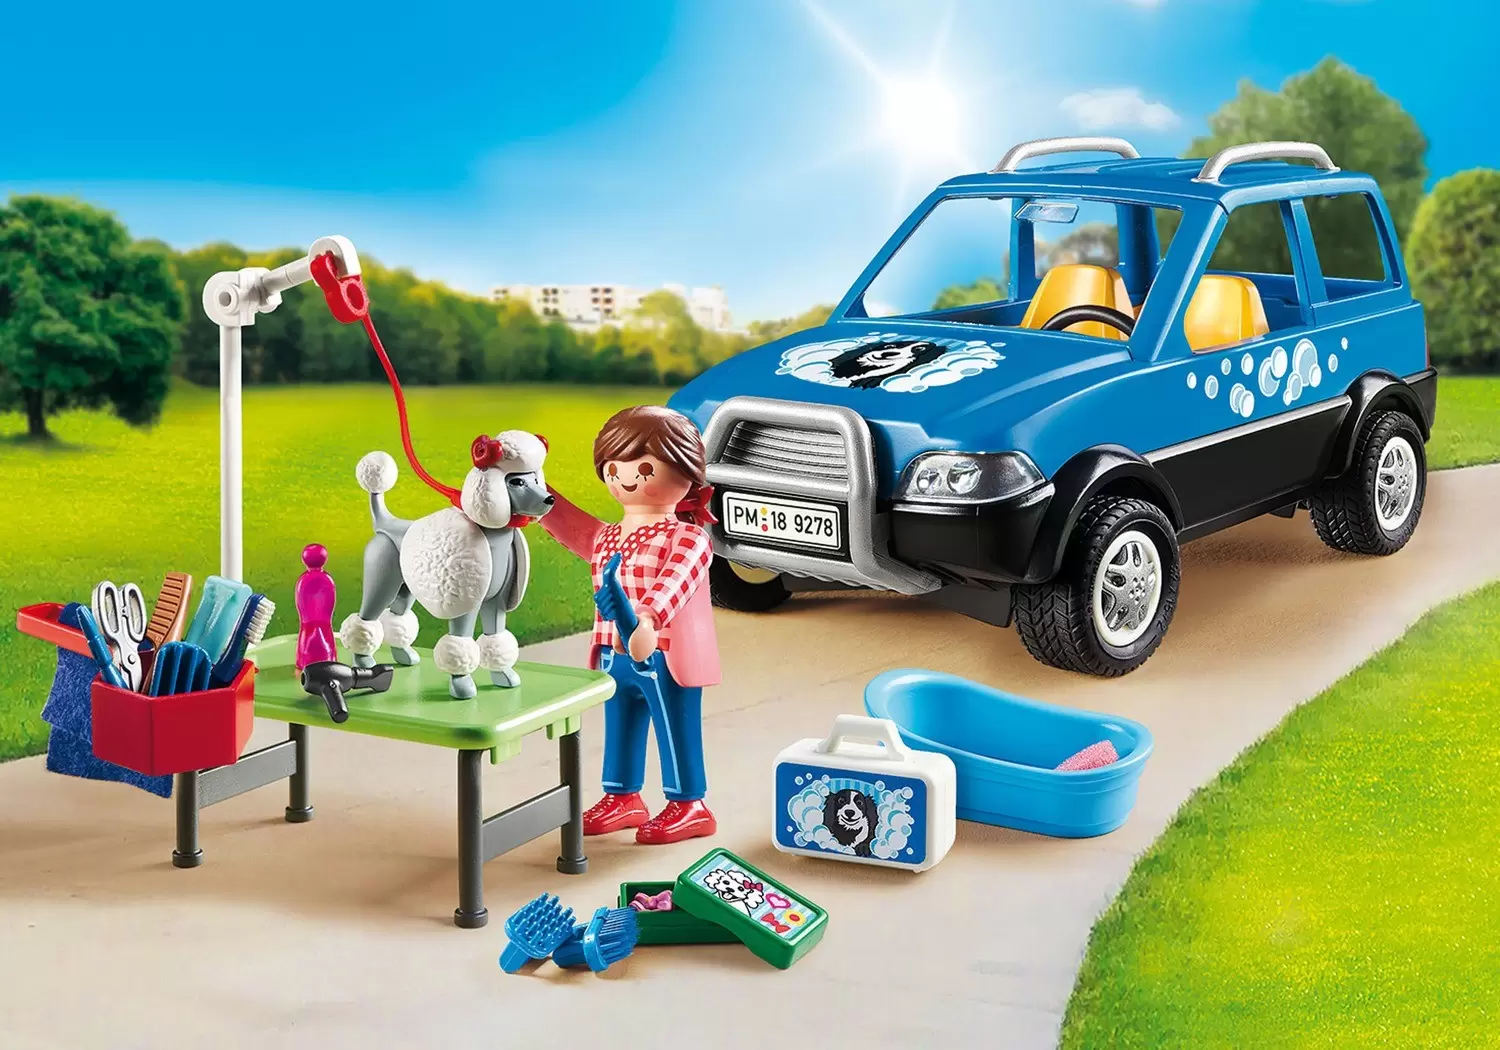 Playmobil in the City - Mobile pet grooming